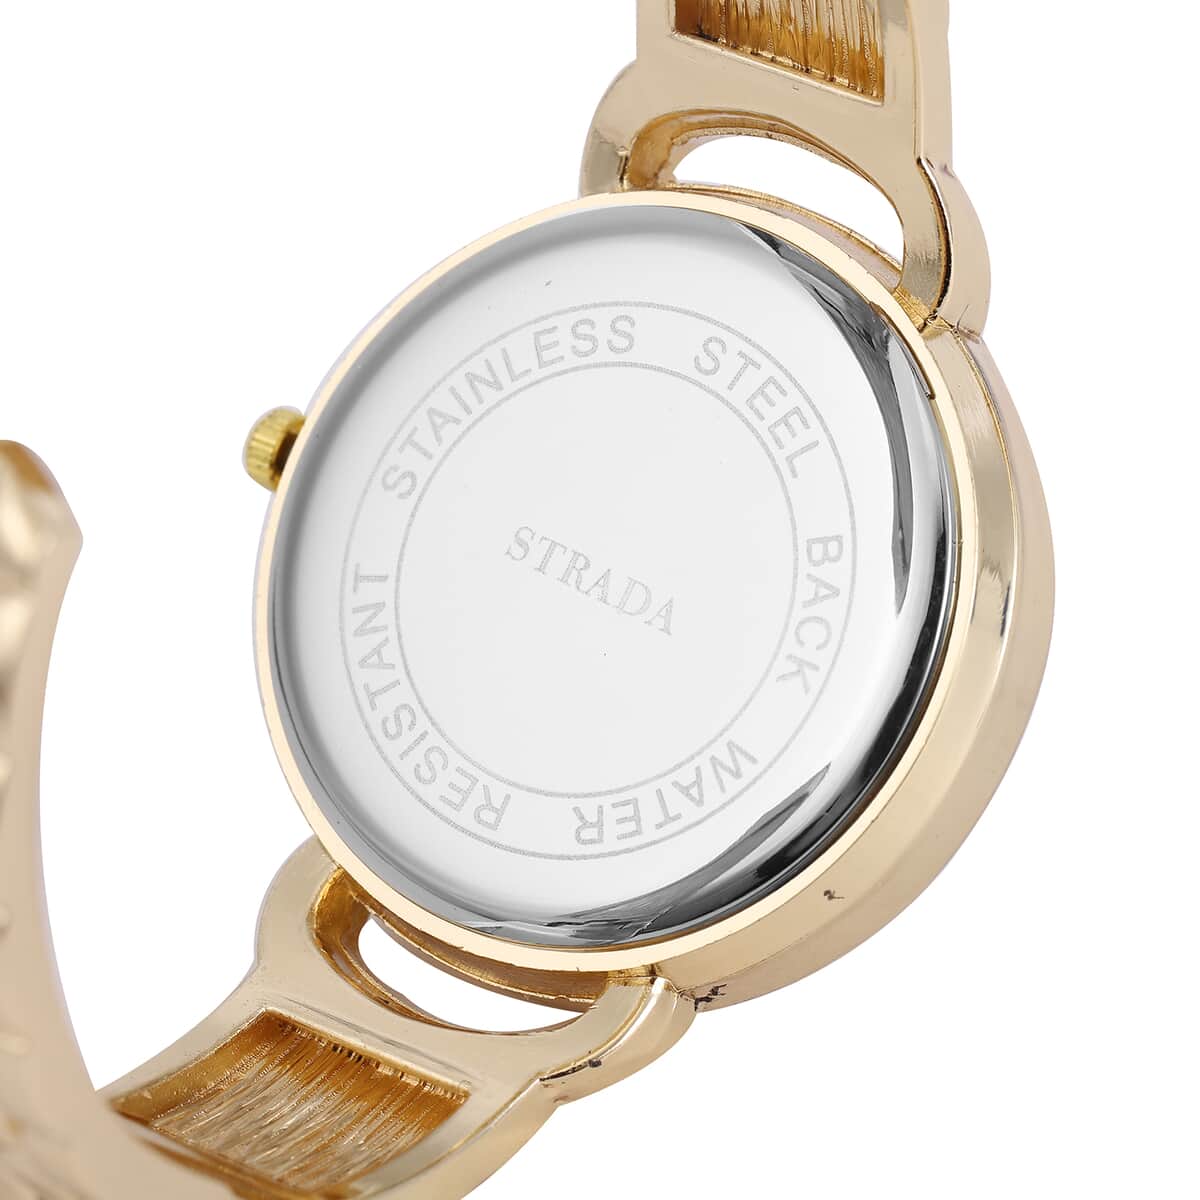 STRADA Japanese Movement Bangle Watch with Black Dial in Goldtone (6.5-7.0In) image number 6